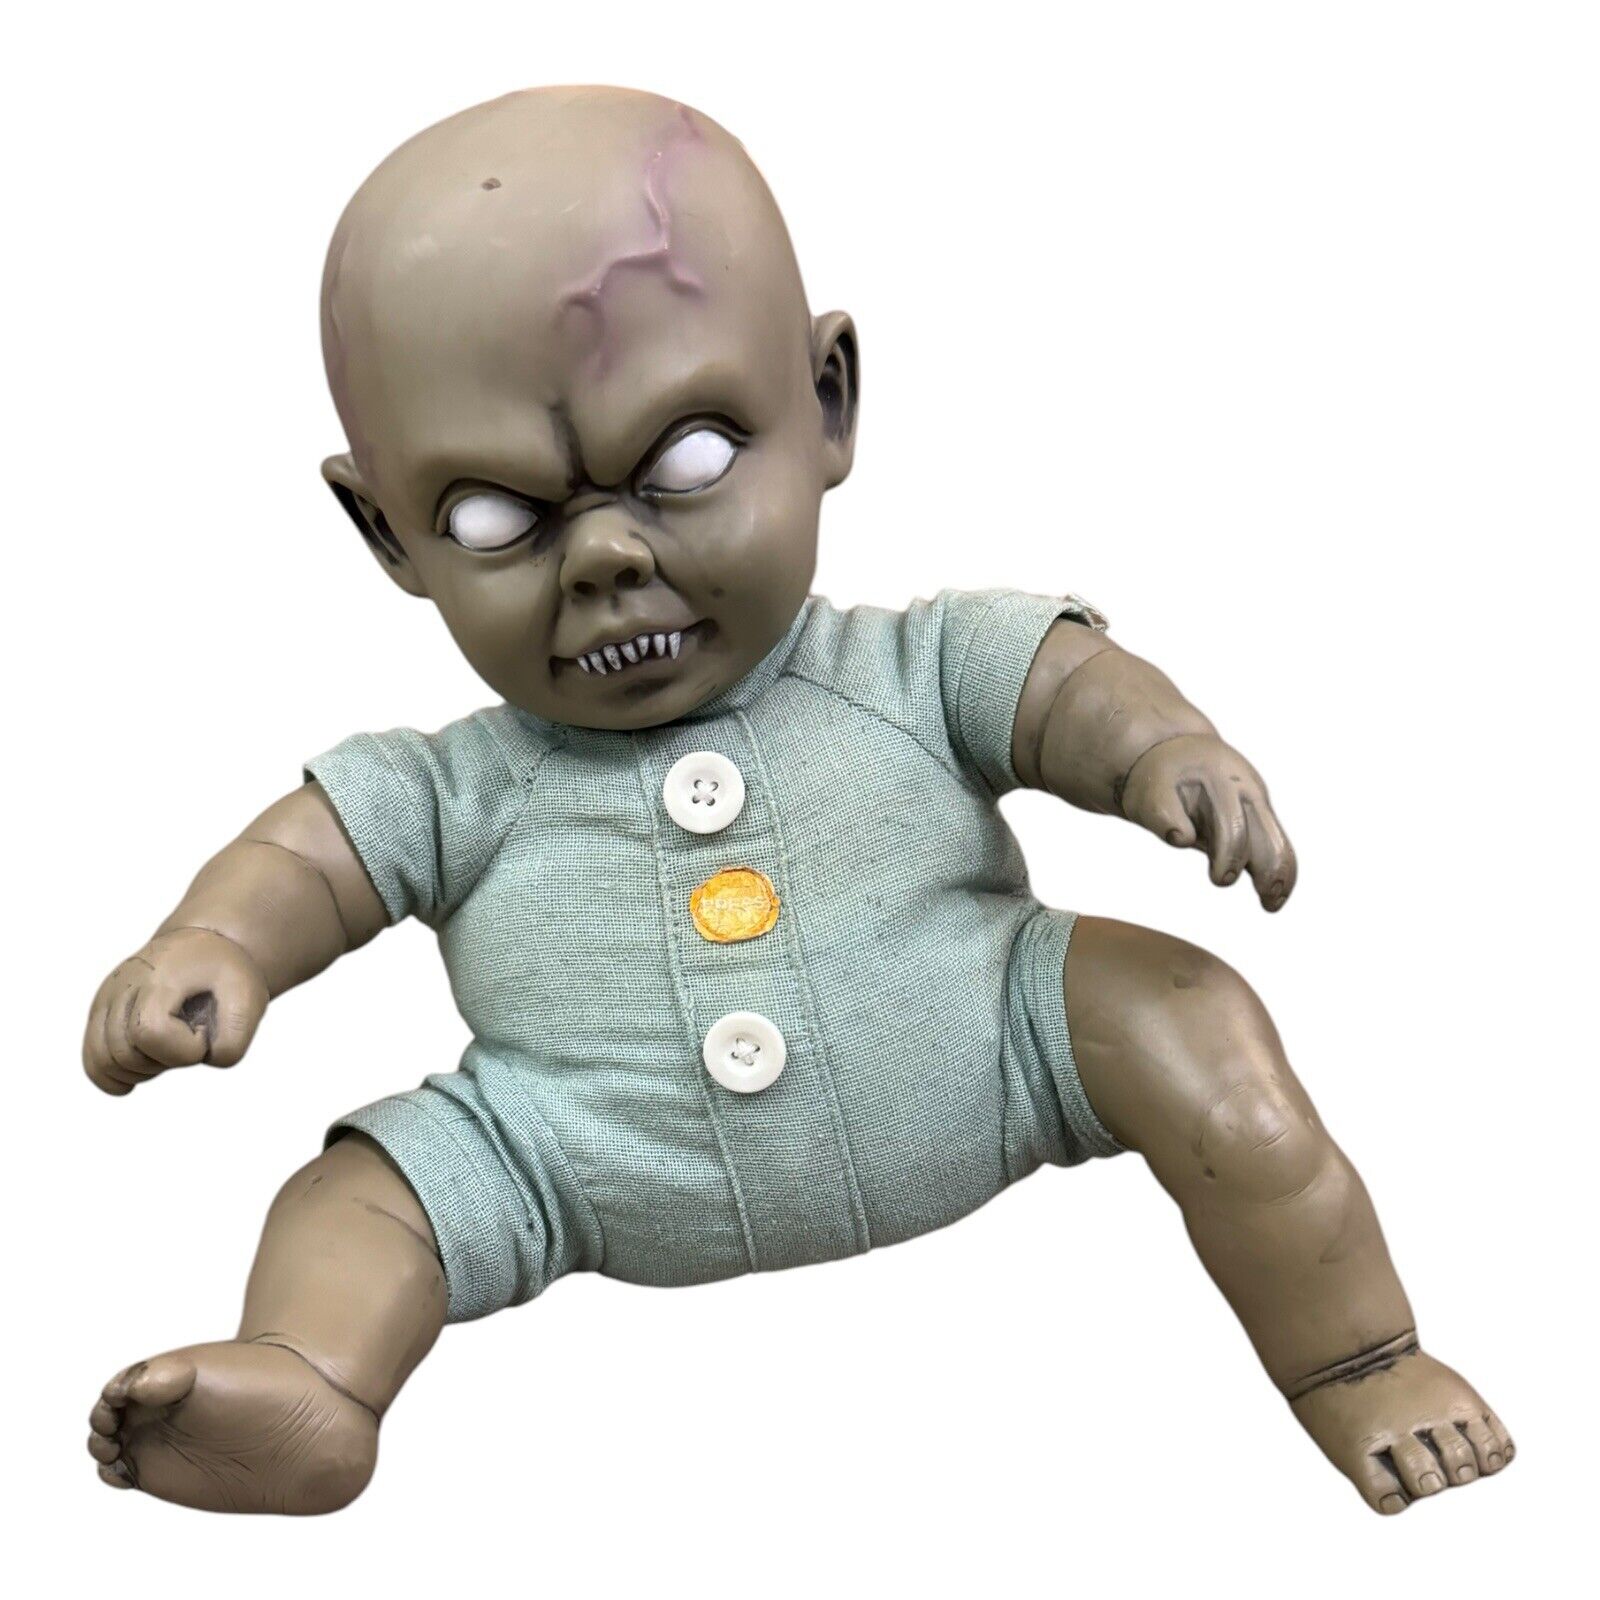 Spirit Halloween Zombie Baby The Wiggler Animated Horror Baby Tested & Works 13”